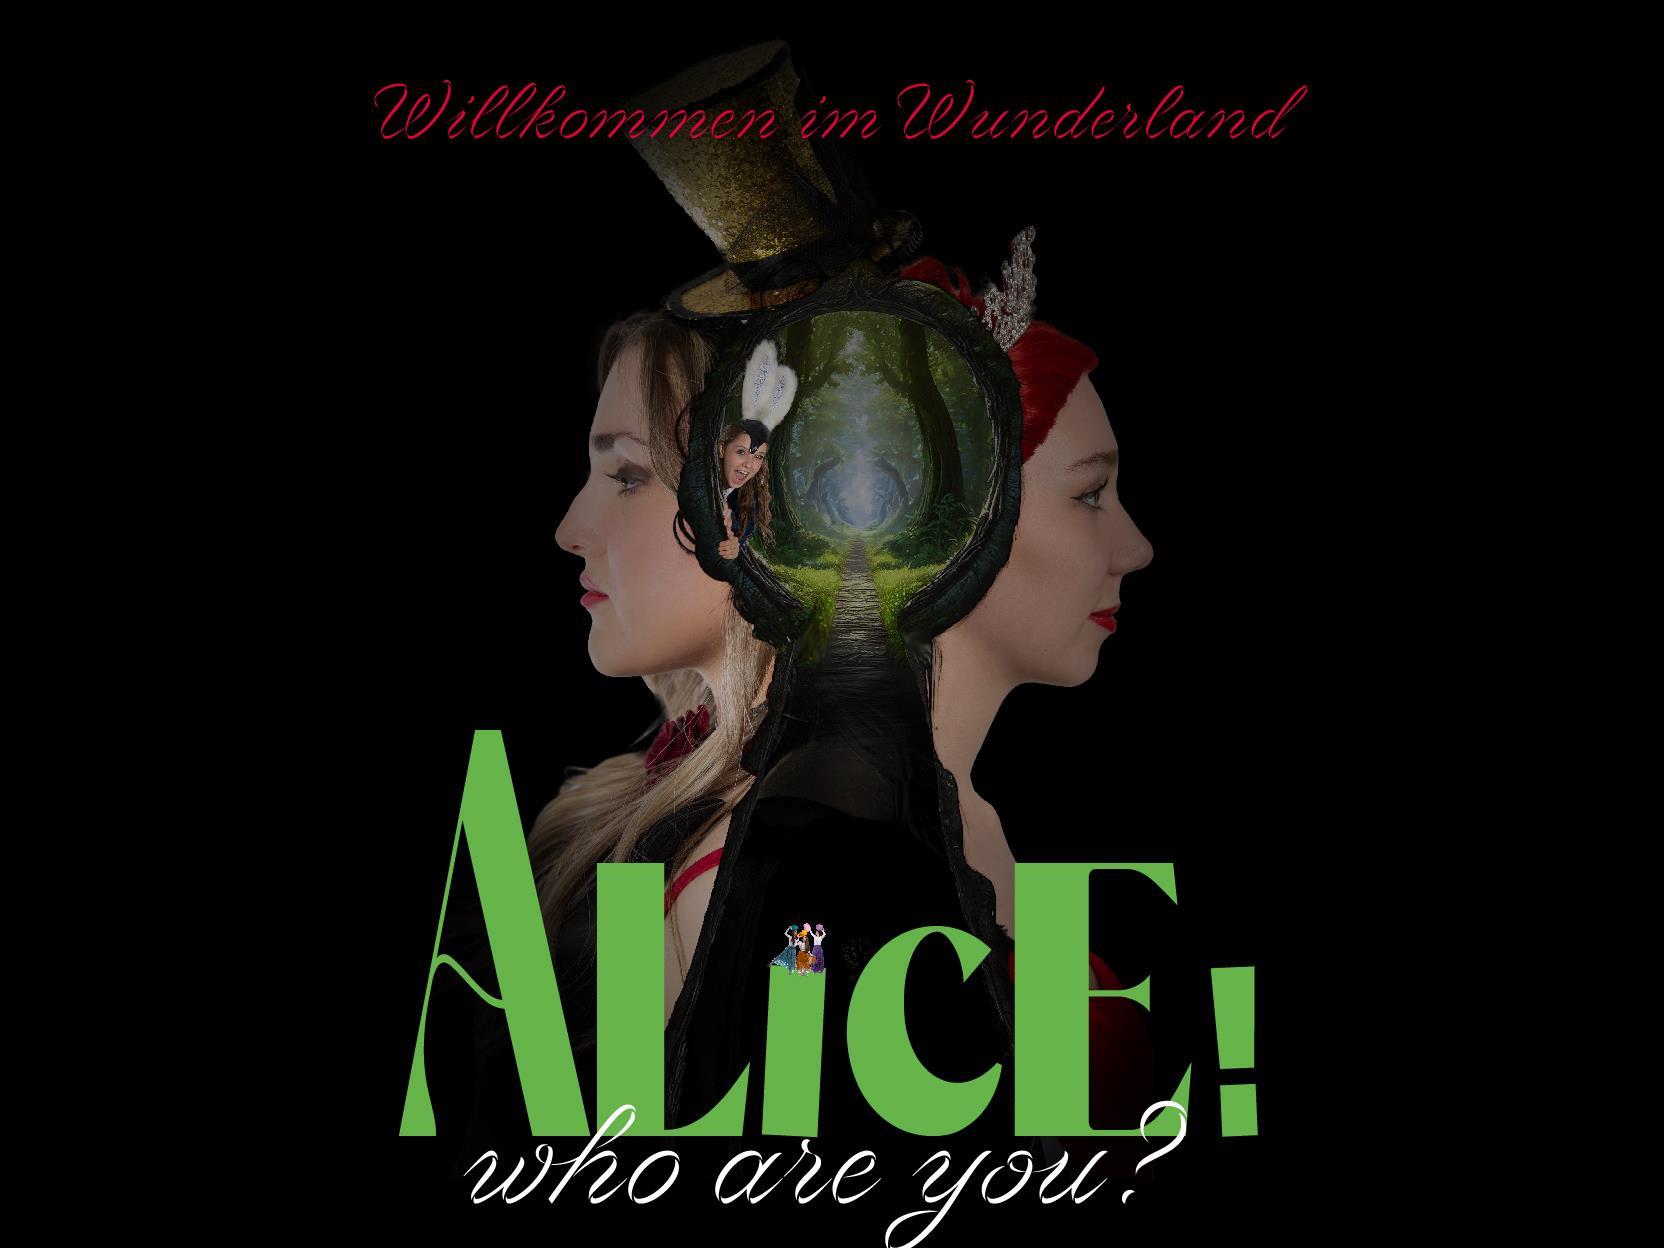 Alice! Who are you?